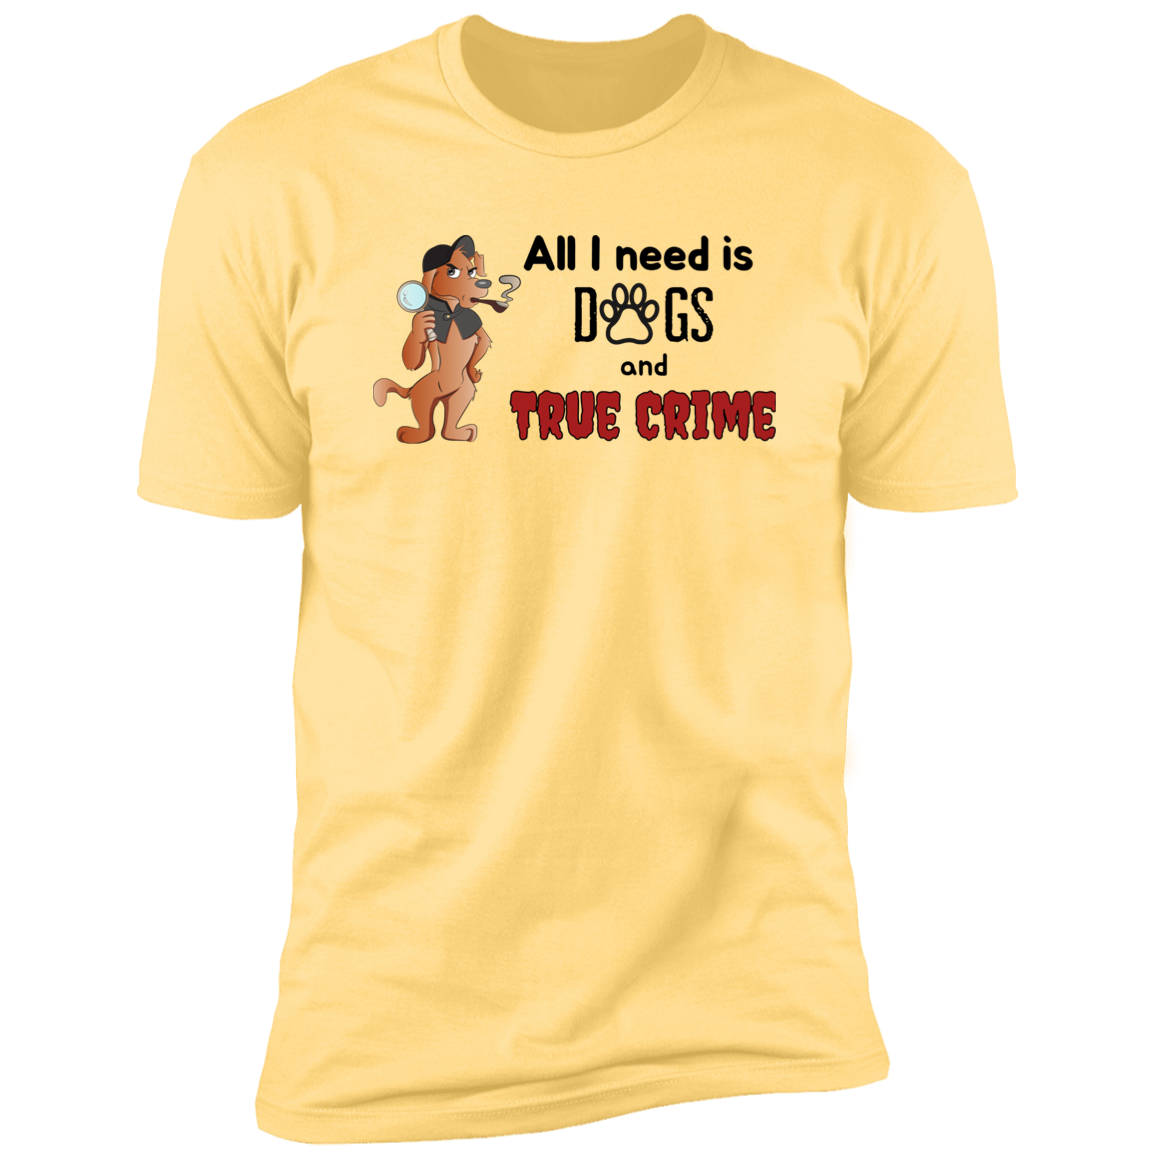 All I Need is Dogs and True Crime, Dog shirt for humas, in banana cream